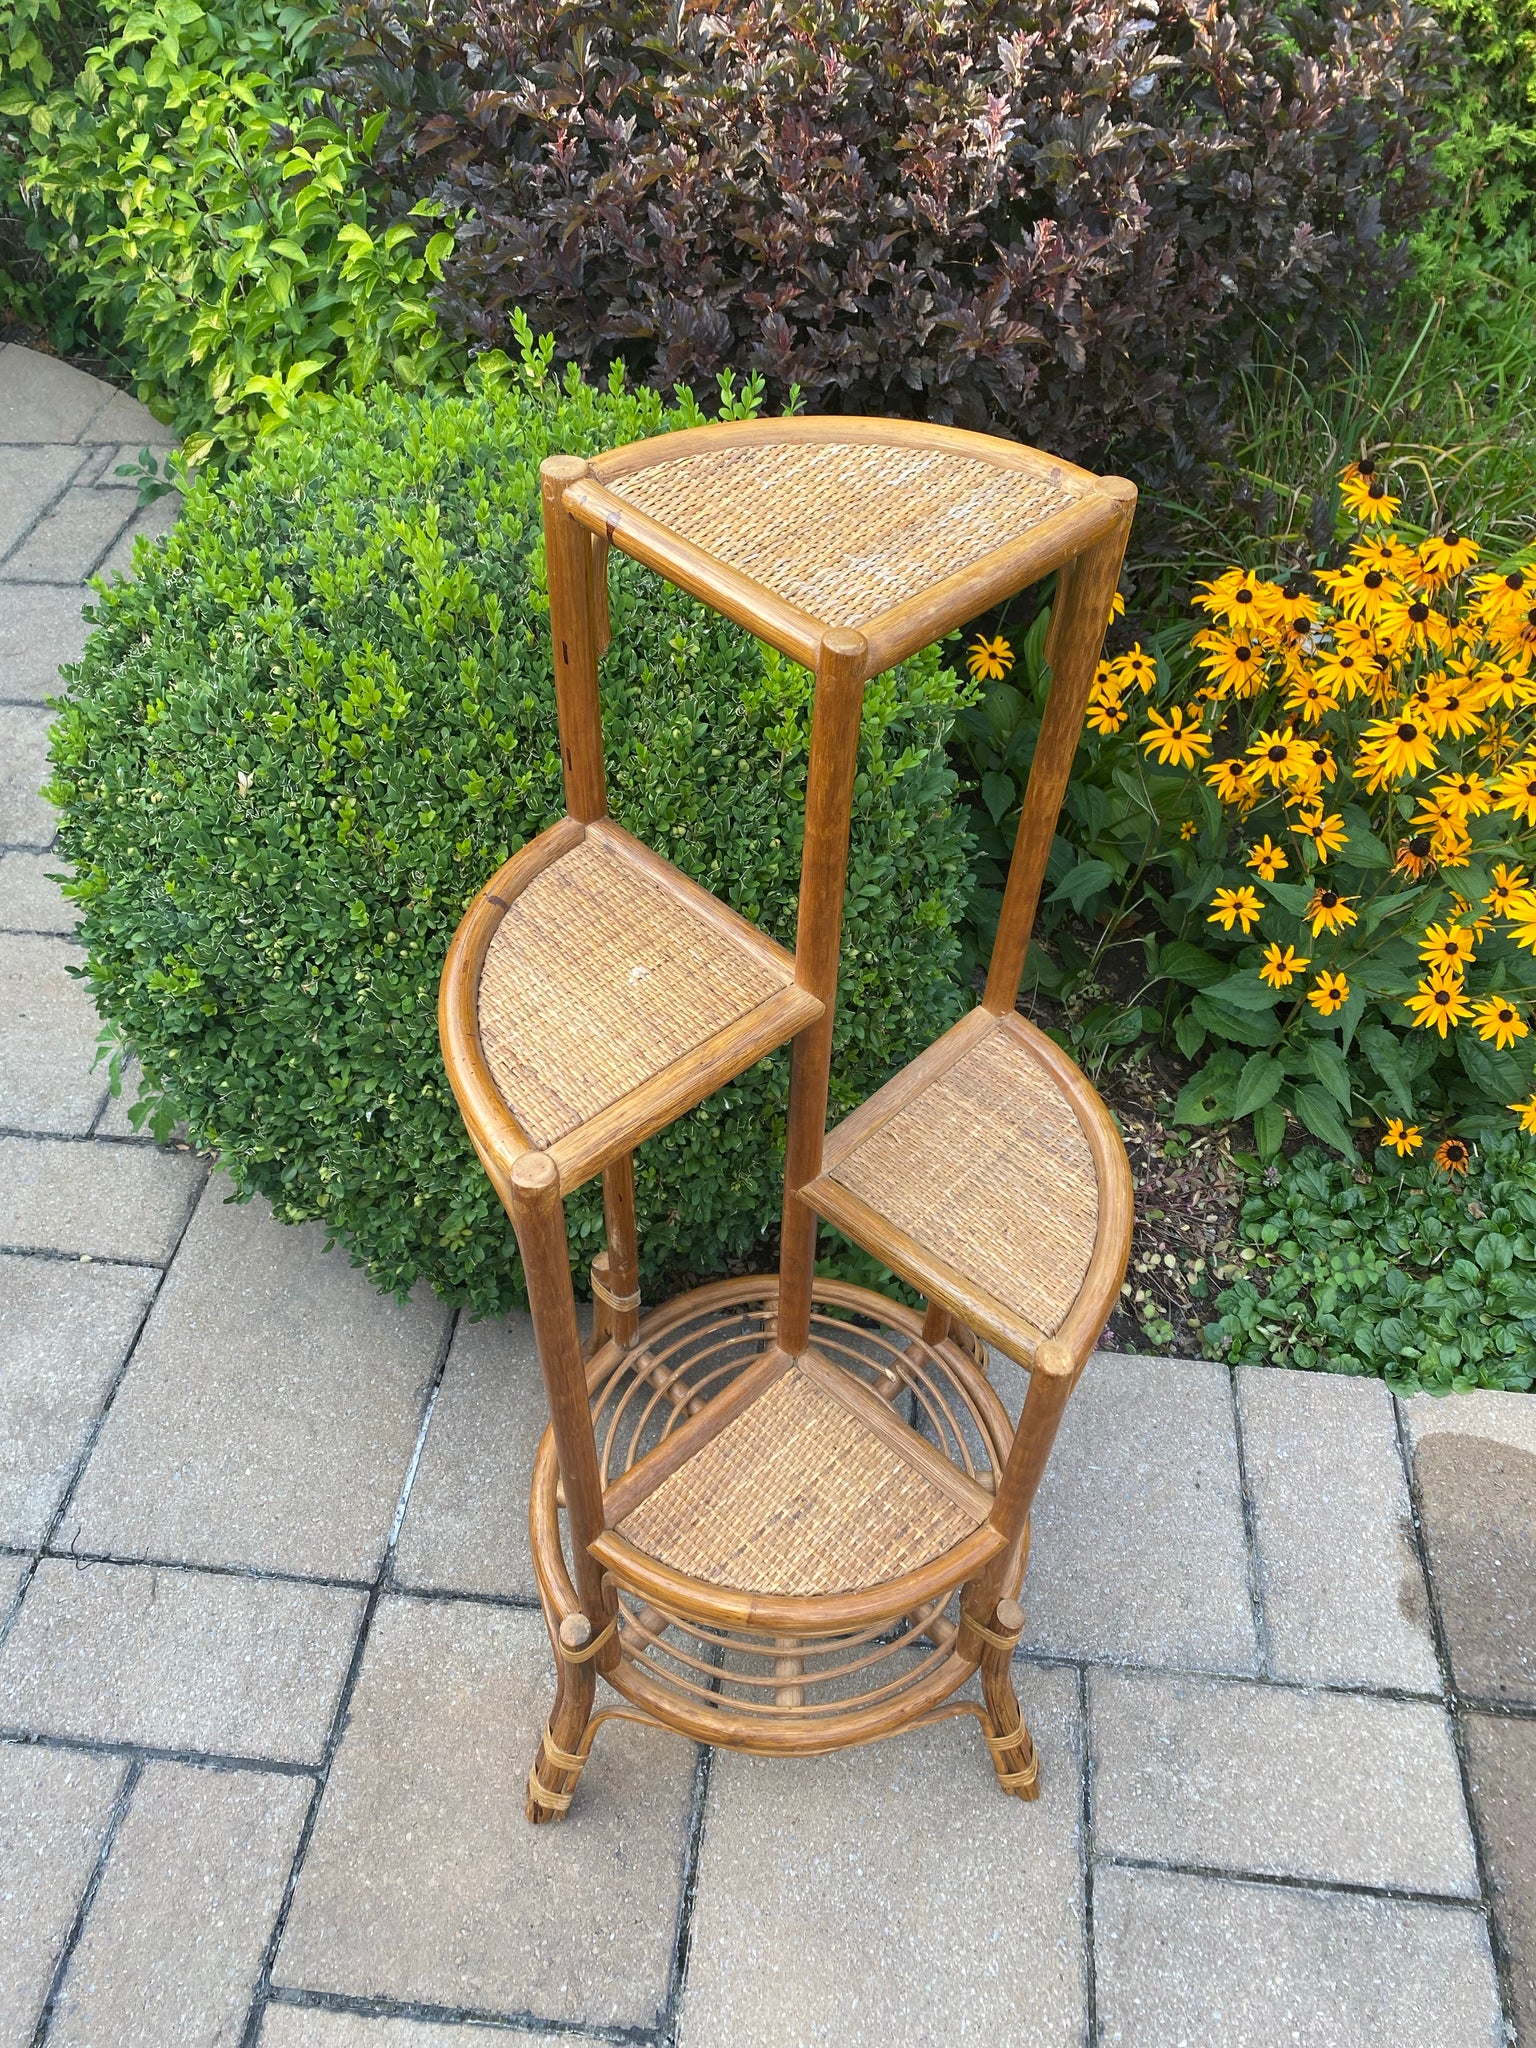 Cute bamboo & wicker plant stand